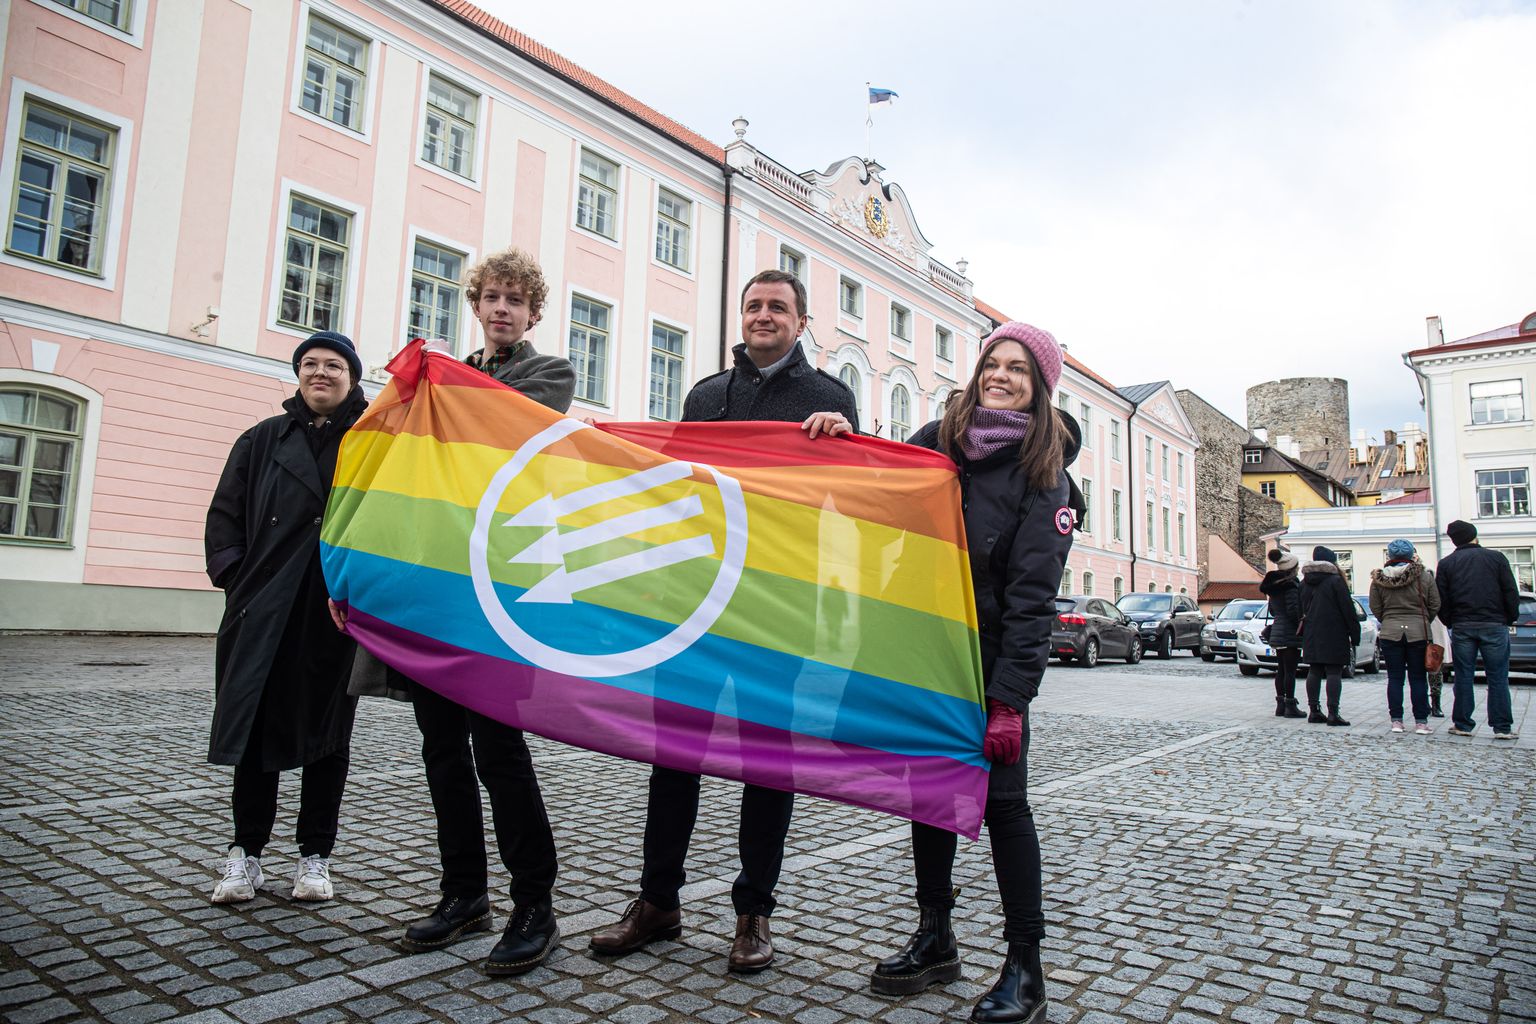 Demonstration in support of marriage equality in Tallinn.